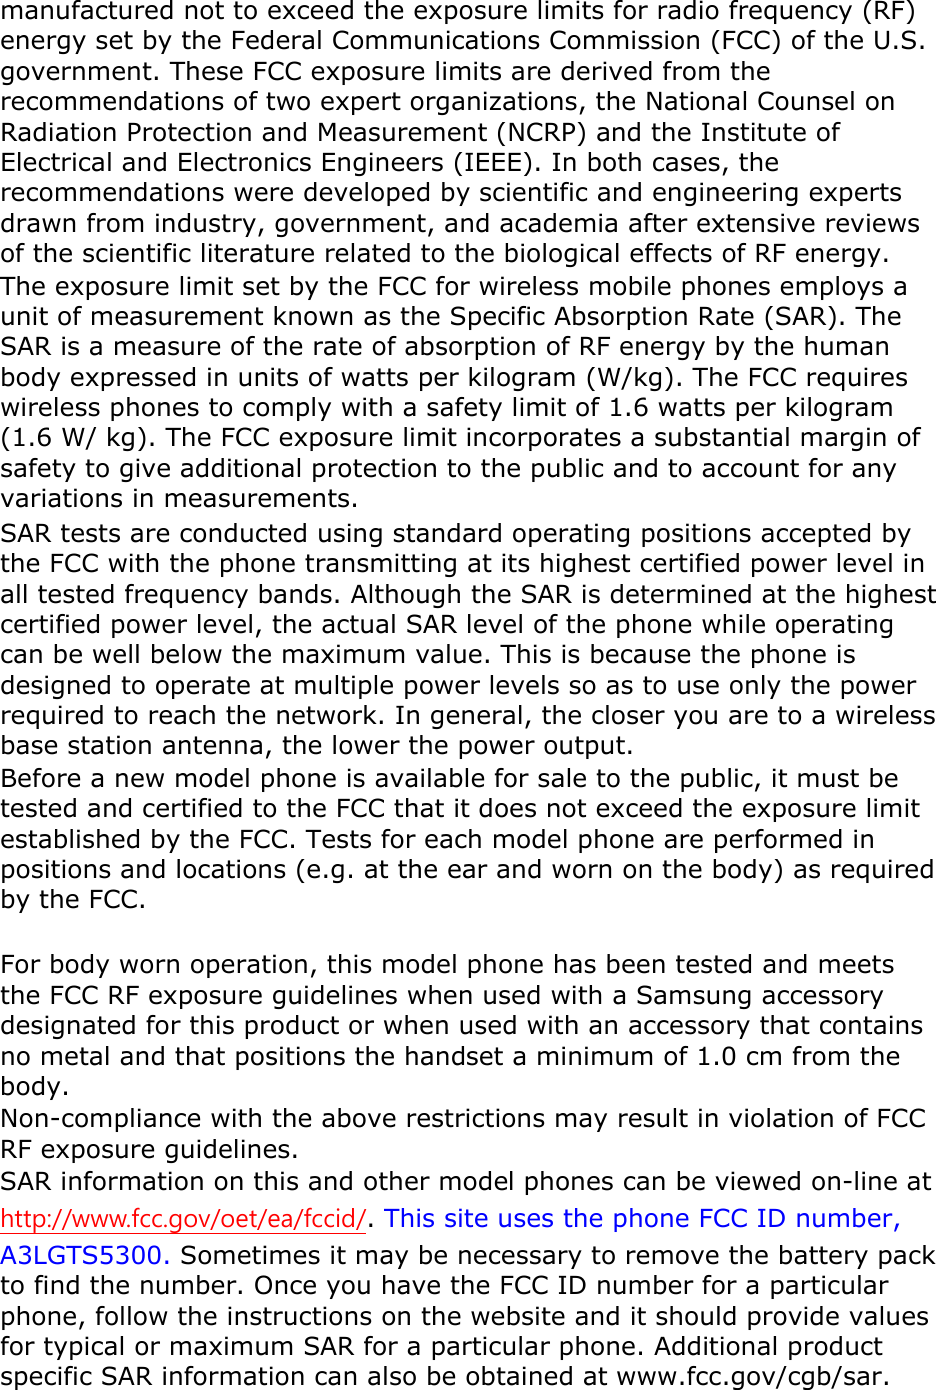 manufactured not to exceed the exposure limits for radio frequency (RF) energy set by the Federal Communications Commission (FCC) of the U.S. government. These FCC exposure limits are derived from the recommendations of two expert organizations, the National Counsel on Radiation Protection and Measurement (NCRP) and the Institute of Electrical and Electronics Engineers (IEEE). In both cases, the recommendations were developed by scientific and engineering experts drawn from industry, government, and academia after extensive reviews of the scientific literature related to the biological effects of RF energy. The exposure limit set by the FCC for wireless mobile phones employs a unit of measurement known as the Specific Absorption Rate (SAR). The SAR is a measure of the rate of absorption of RF energy by the human body expressed in units of watts per kilogram (W/kg). The FCC requires wireless phones to comply with a safety limit of 1.6 watts per kilogram (1.6 W/ kg). The FCC exposure limit incorporates a substantial margin of safety to give additional protection to the public and to account for any variations in measurements. SAR tests are conducted using standard operating positions accepted by the FCC with the phone transmitting at its highest certified power level in all tested frequency bands. Although the SAR is determined at the highest certified power level, the actual SAR level of the phone while operating can be well below the maximum value. This is because the phone is designed to operate at multiple power levels so as to use only the power required to reach the network. In general, the closer you are to a wireless base station antenna, the lower the power output. Before a new model phone is available for sale to the public, it must be tested and certified to the FCC that it does not exceed the exposure limit established by the FCC. Tests for each model phone are performed in positions and locations (e.g. at the ear and worn on the body) as required by the FCC.      For body worn operation, this model phone has been tested and meets the FCC RF exposure guidelines when used with a Samsung accessory designated for this product or when used with an accessory that contains no metal and that positions the handset a minimum of 1.0 cm from the body.  Non-compliance with the above restrictions may result in violation of FCC RF exposure guidelines. SAR information on this and other model phones can be viewed on-line at http://www.fcc.gov/oet/ea/fccid/. This site uses the phone FCC ID number, A3LGTS5300. Sometimes it may be necessary to remove the battery pack to find the number. Once you have the FCC ID number for a particular phone, follow the instructions on the website and it should provide values for typical or maximum SAR for a particular phone. Additional product specific SAR information can also be obtained at www.fcc.gov/cgb/sar. 